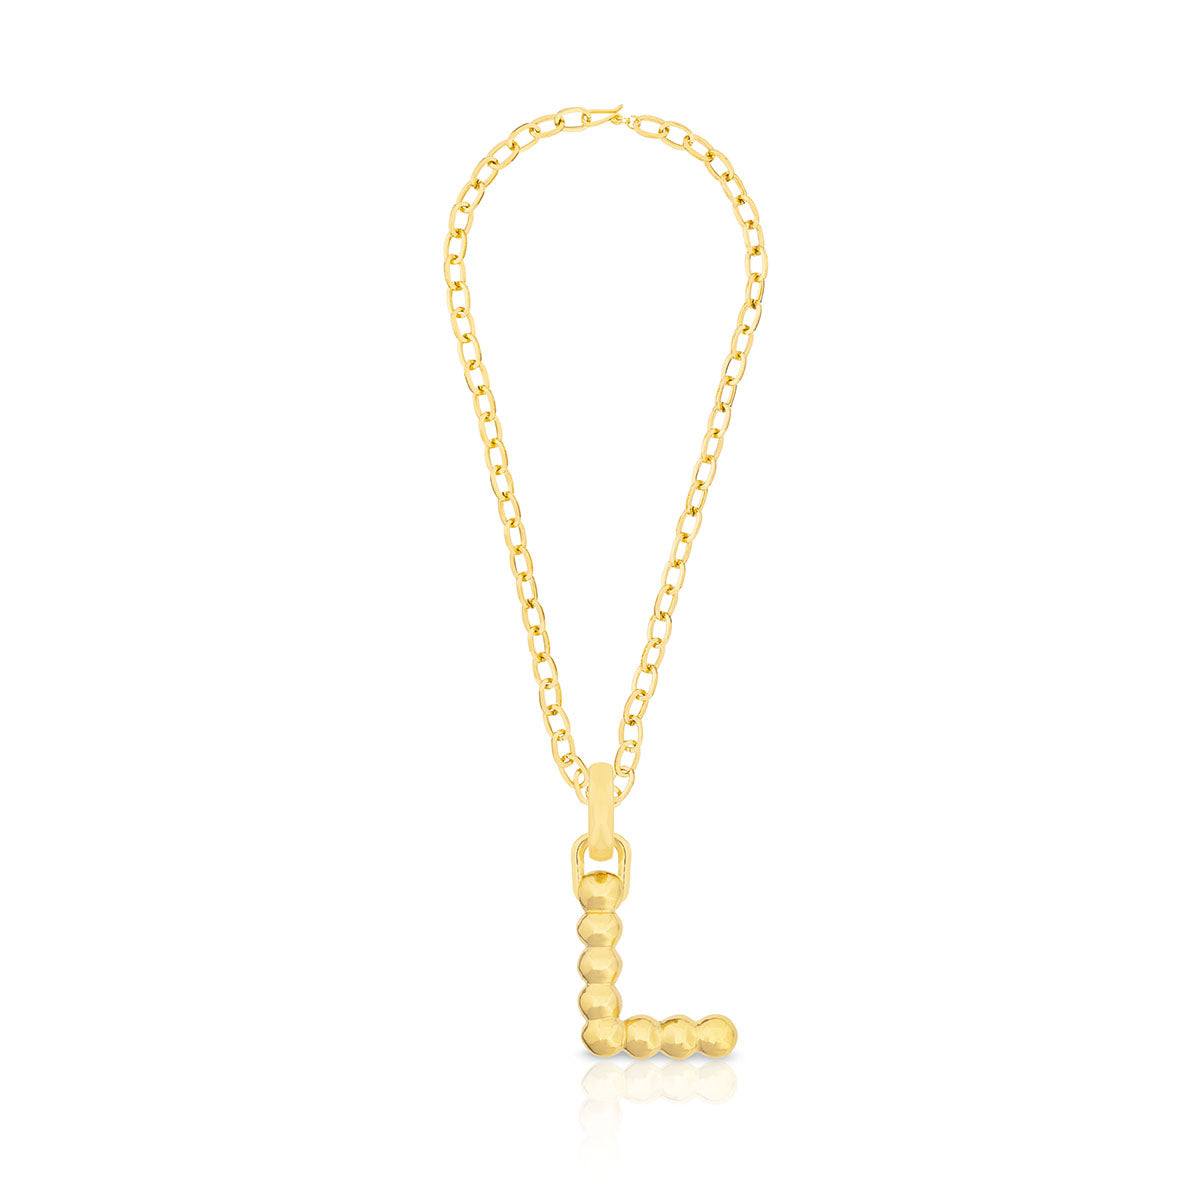 BOLD LETTER NECKLACE